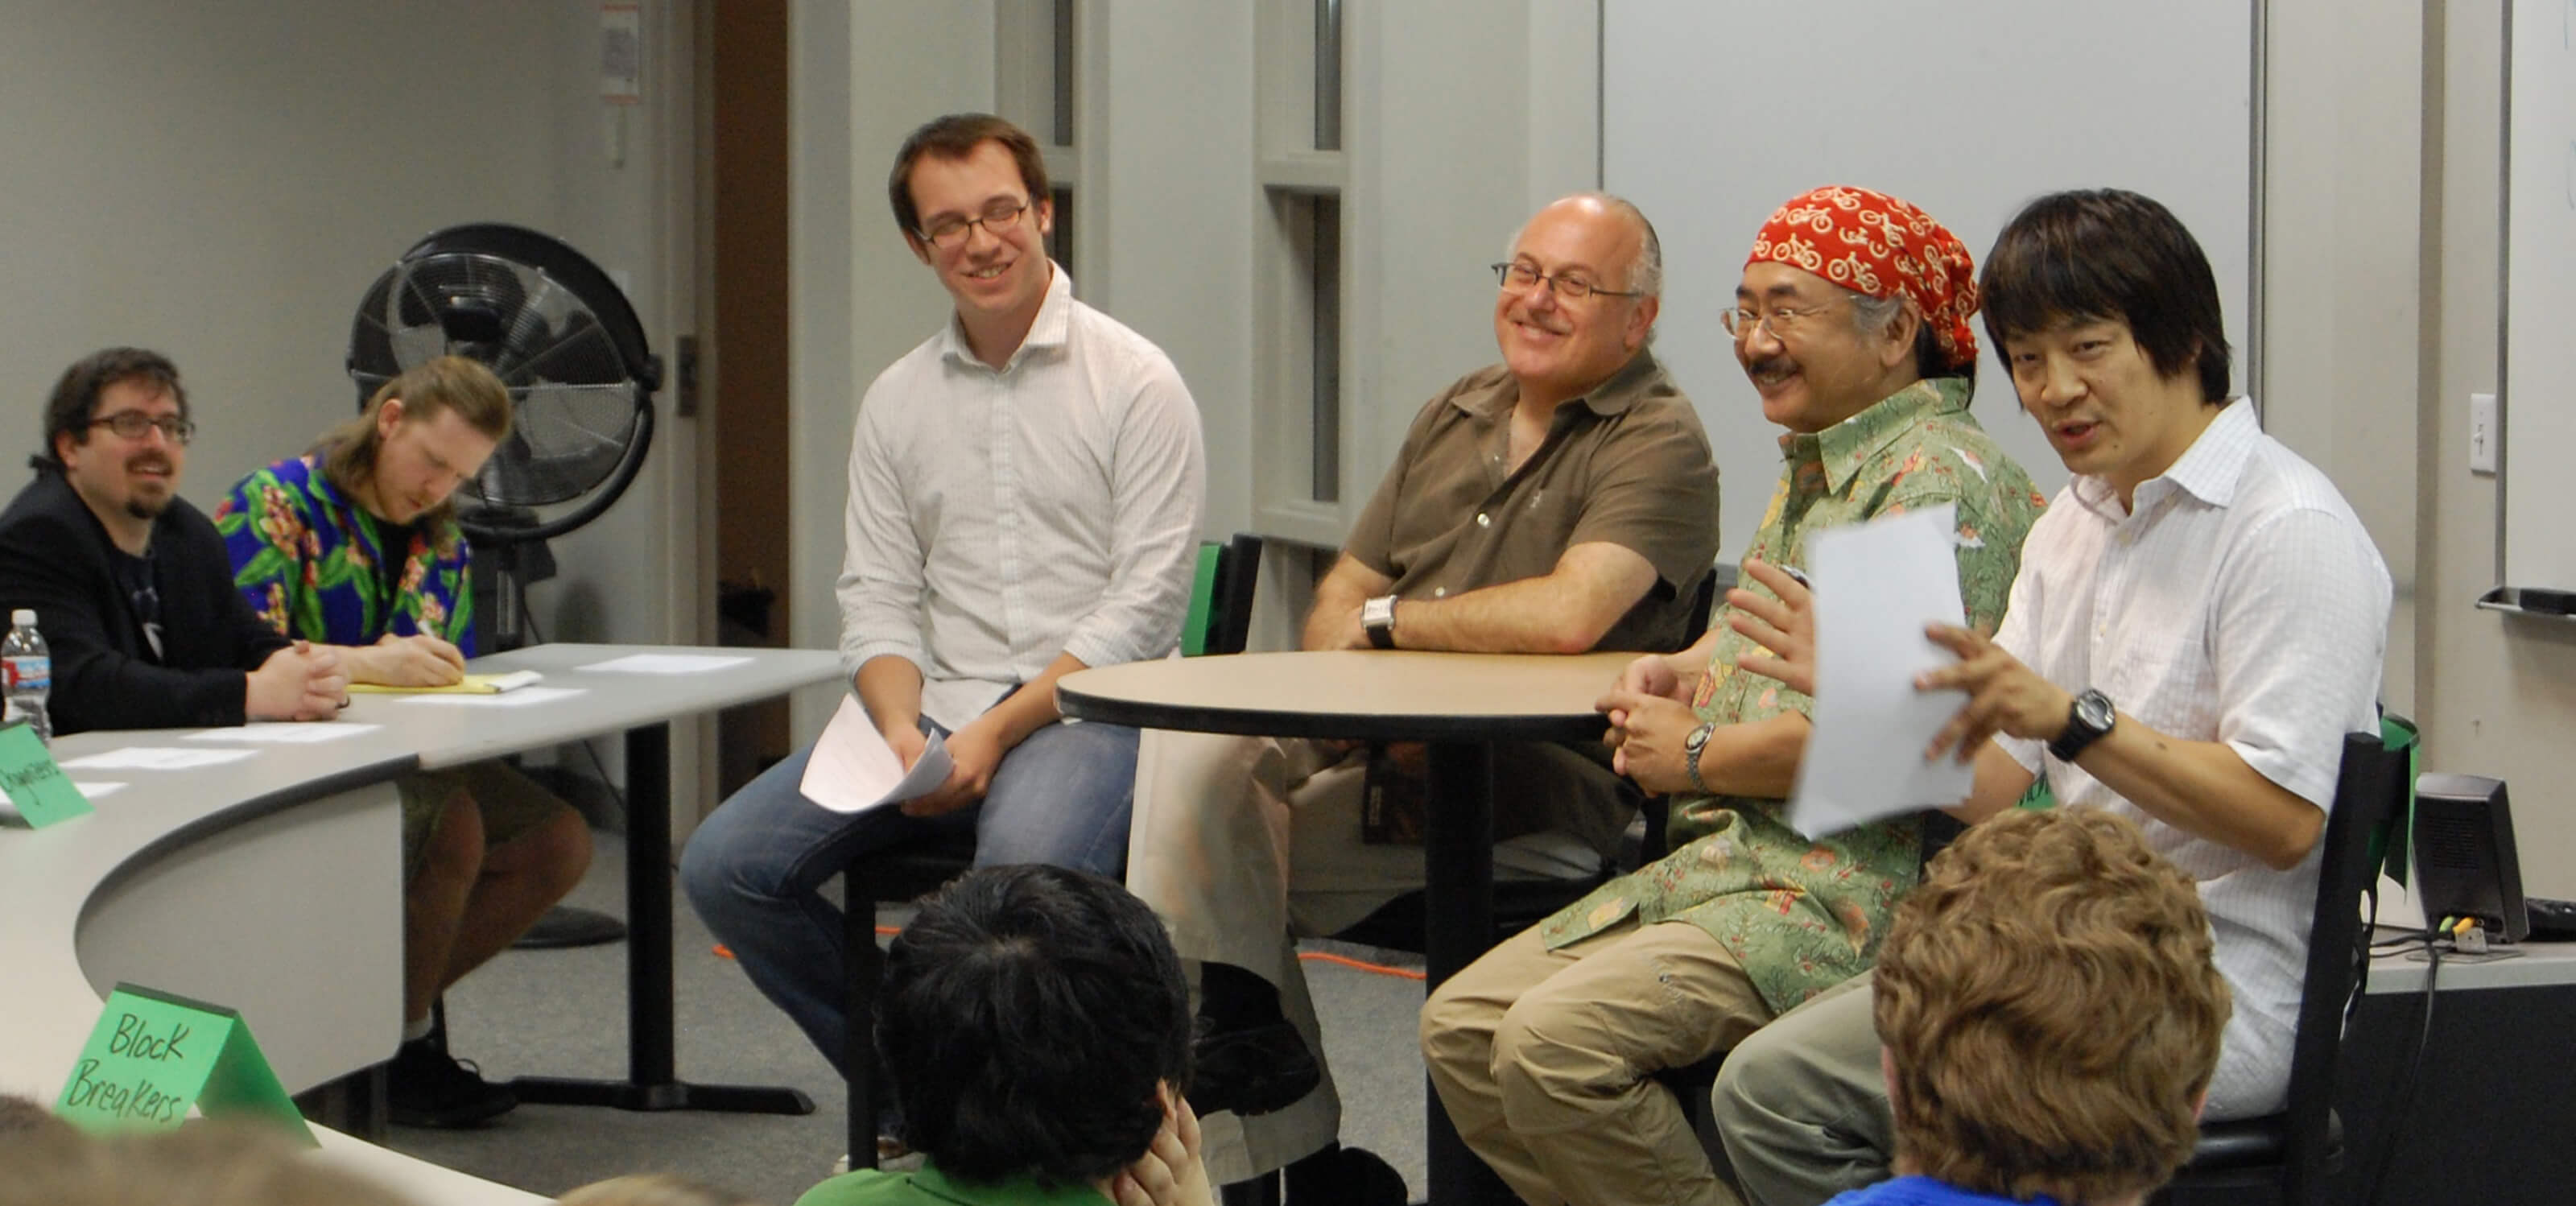 Nobuo Uematsu and Arnie Roth speak to students in a DigiPen classroom